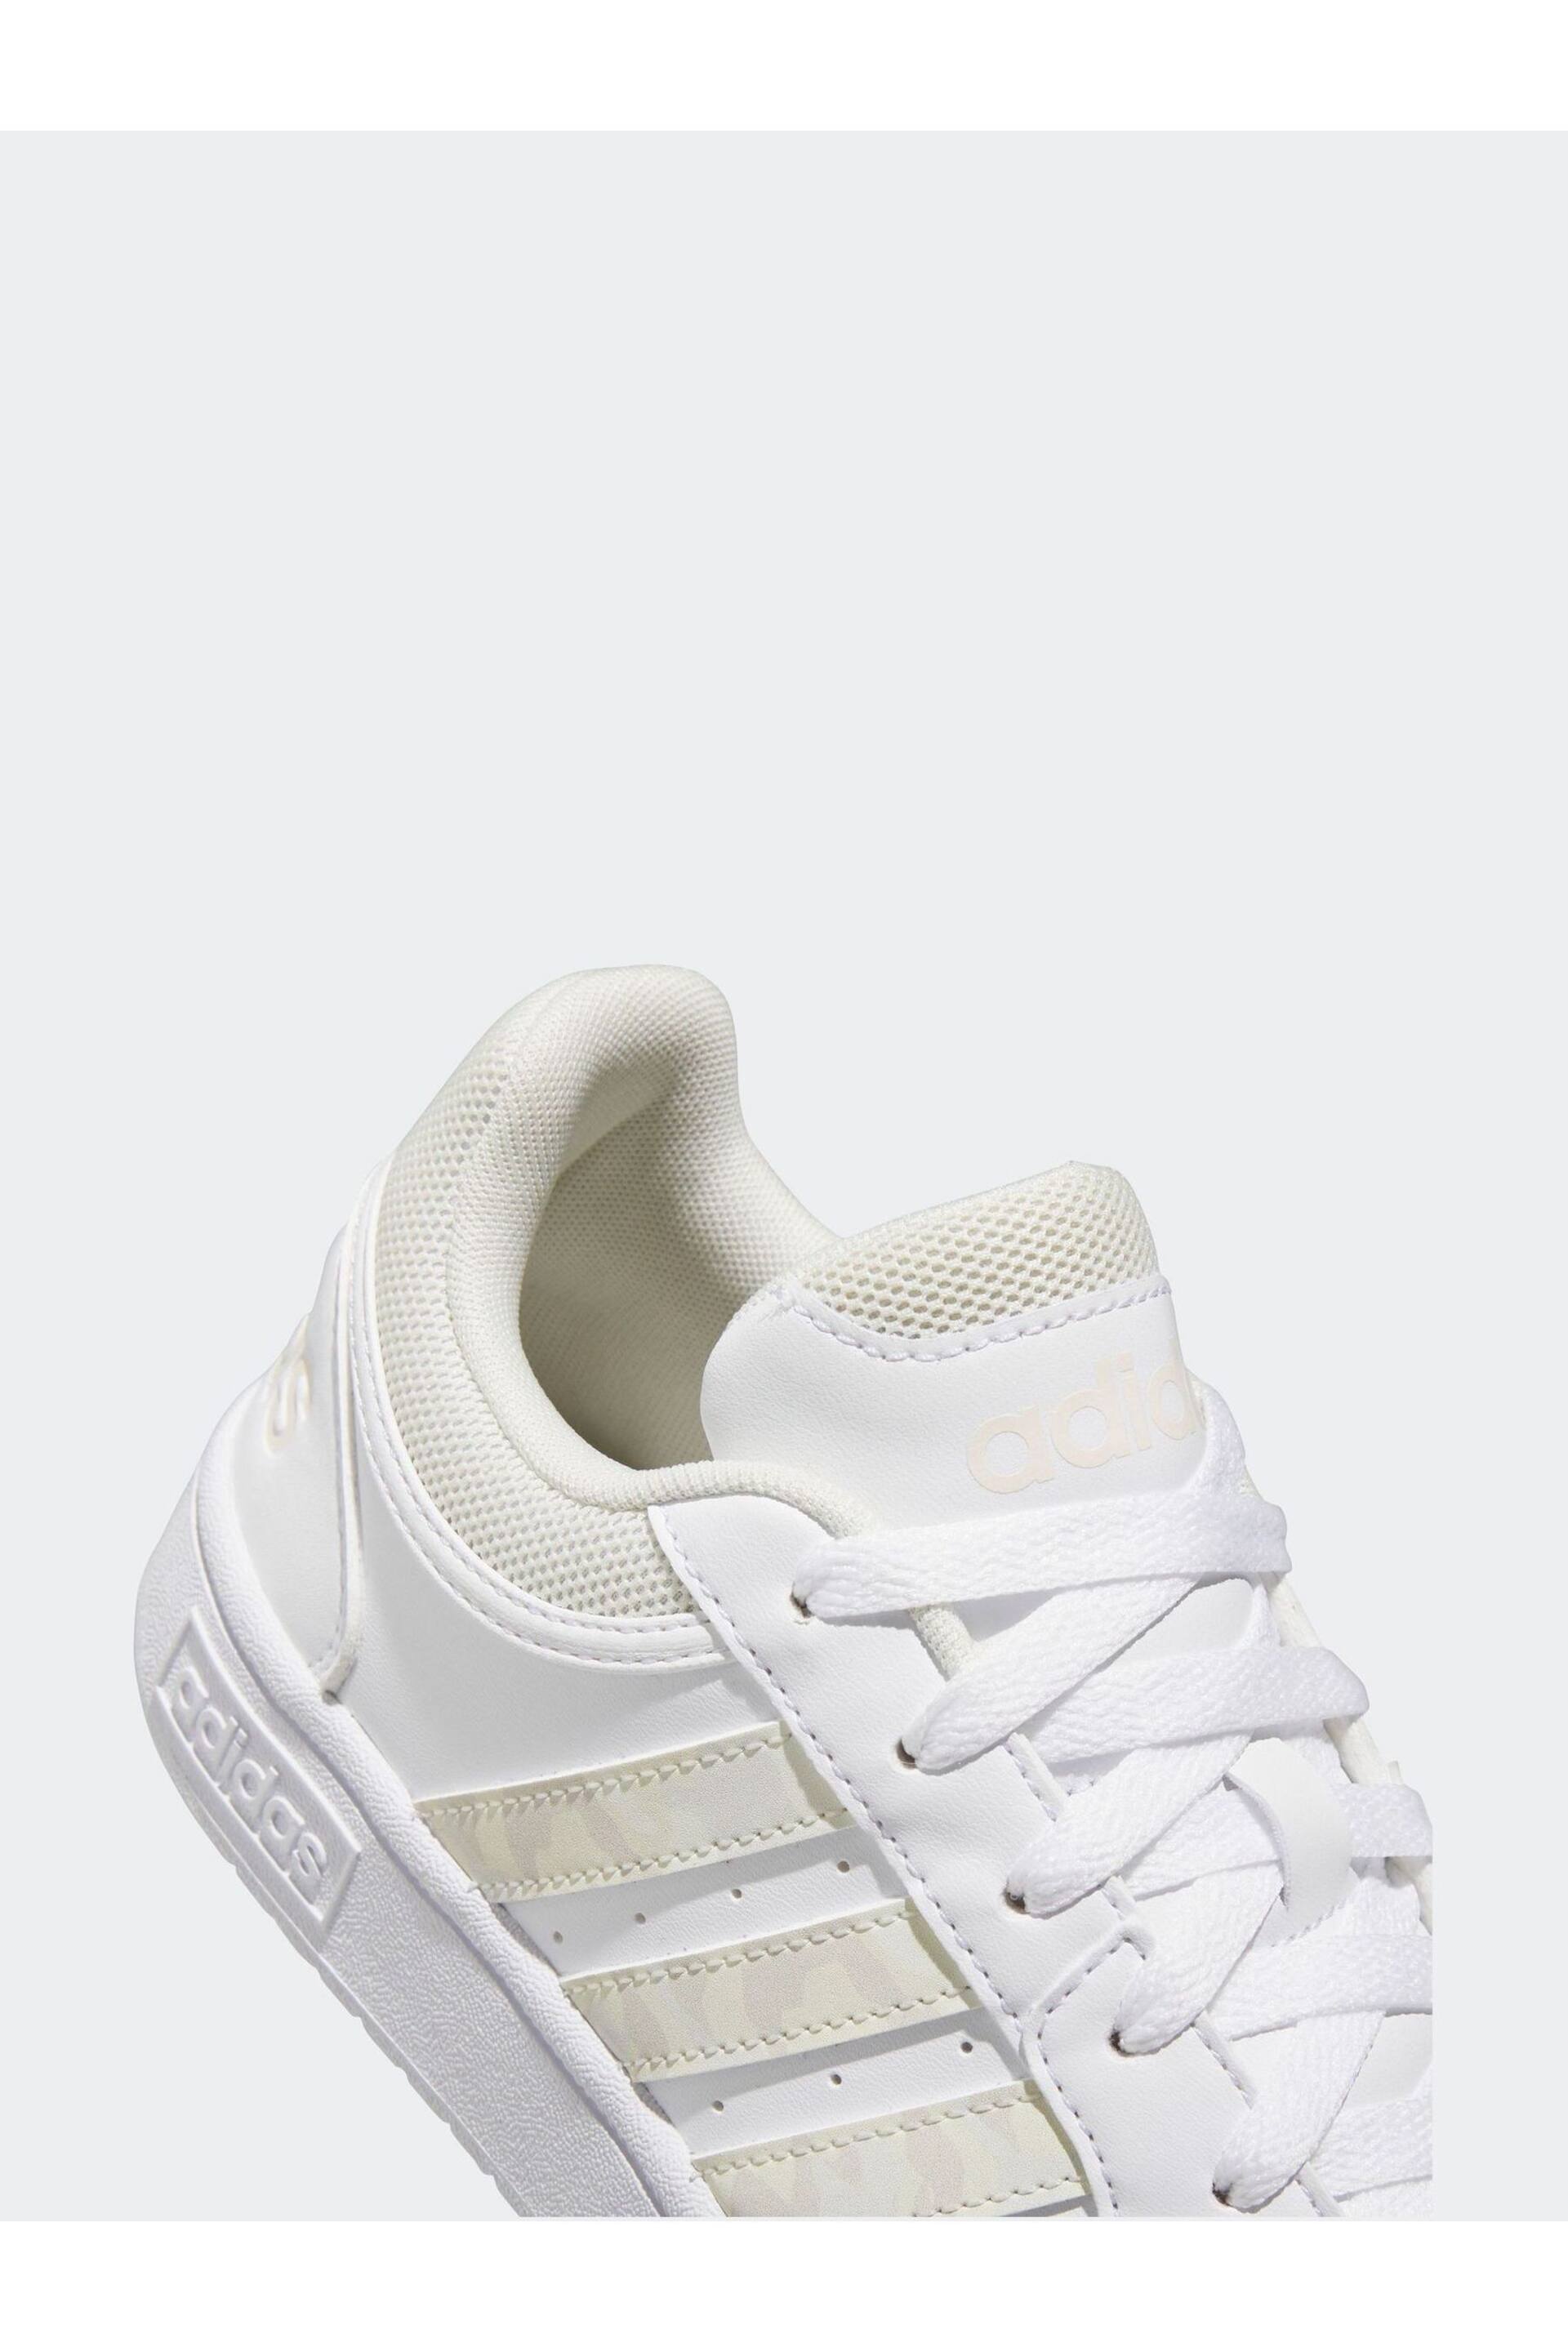 adidas White Originals Hoops 3 Trainers - Image 7 of 8